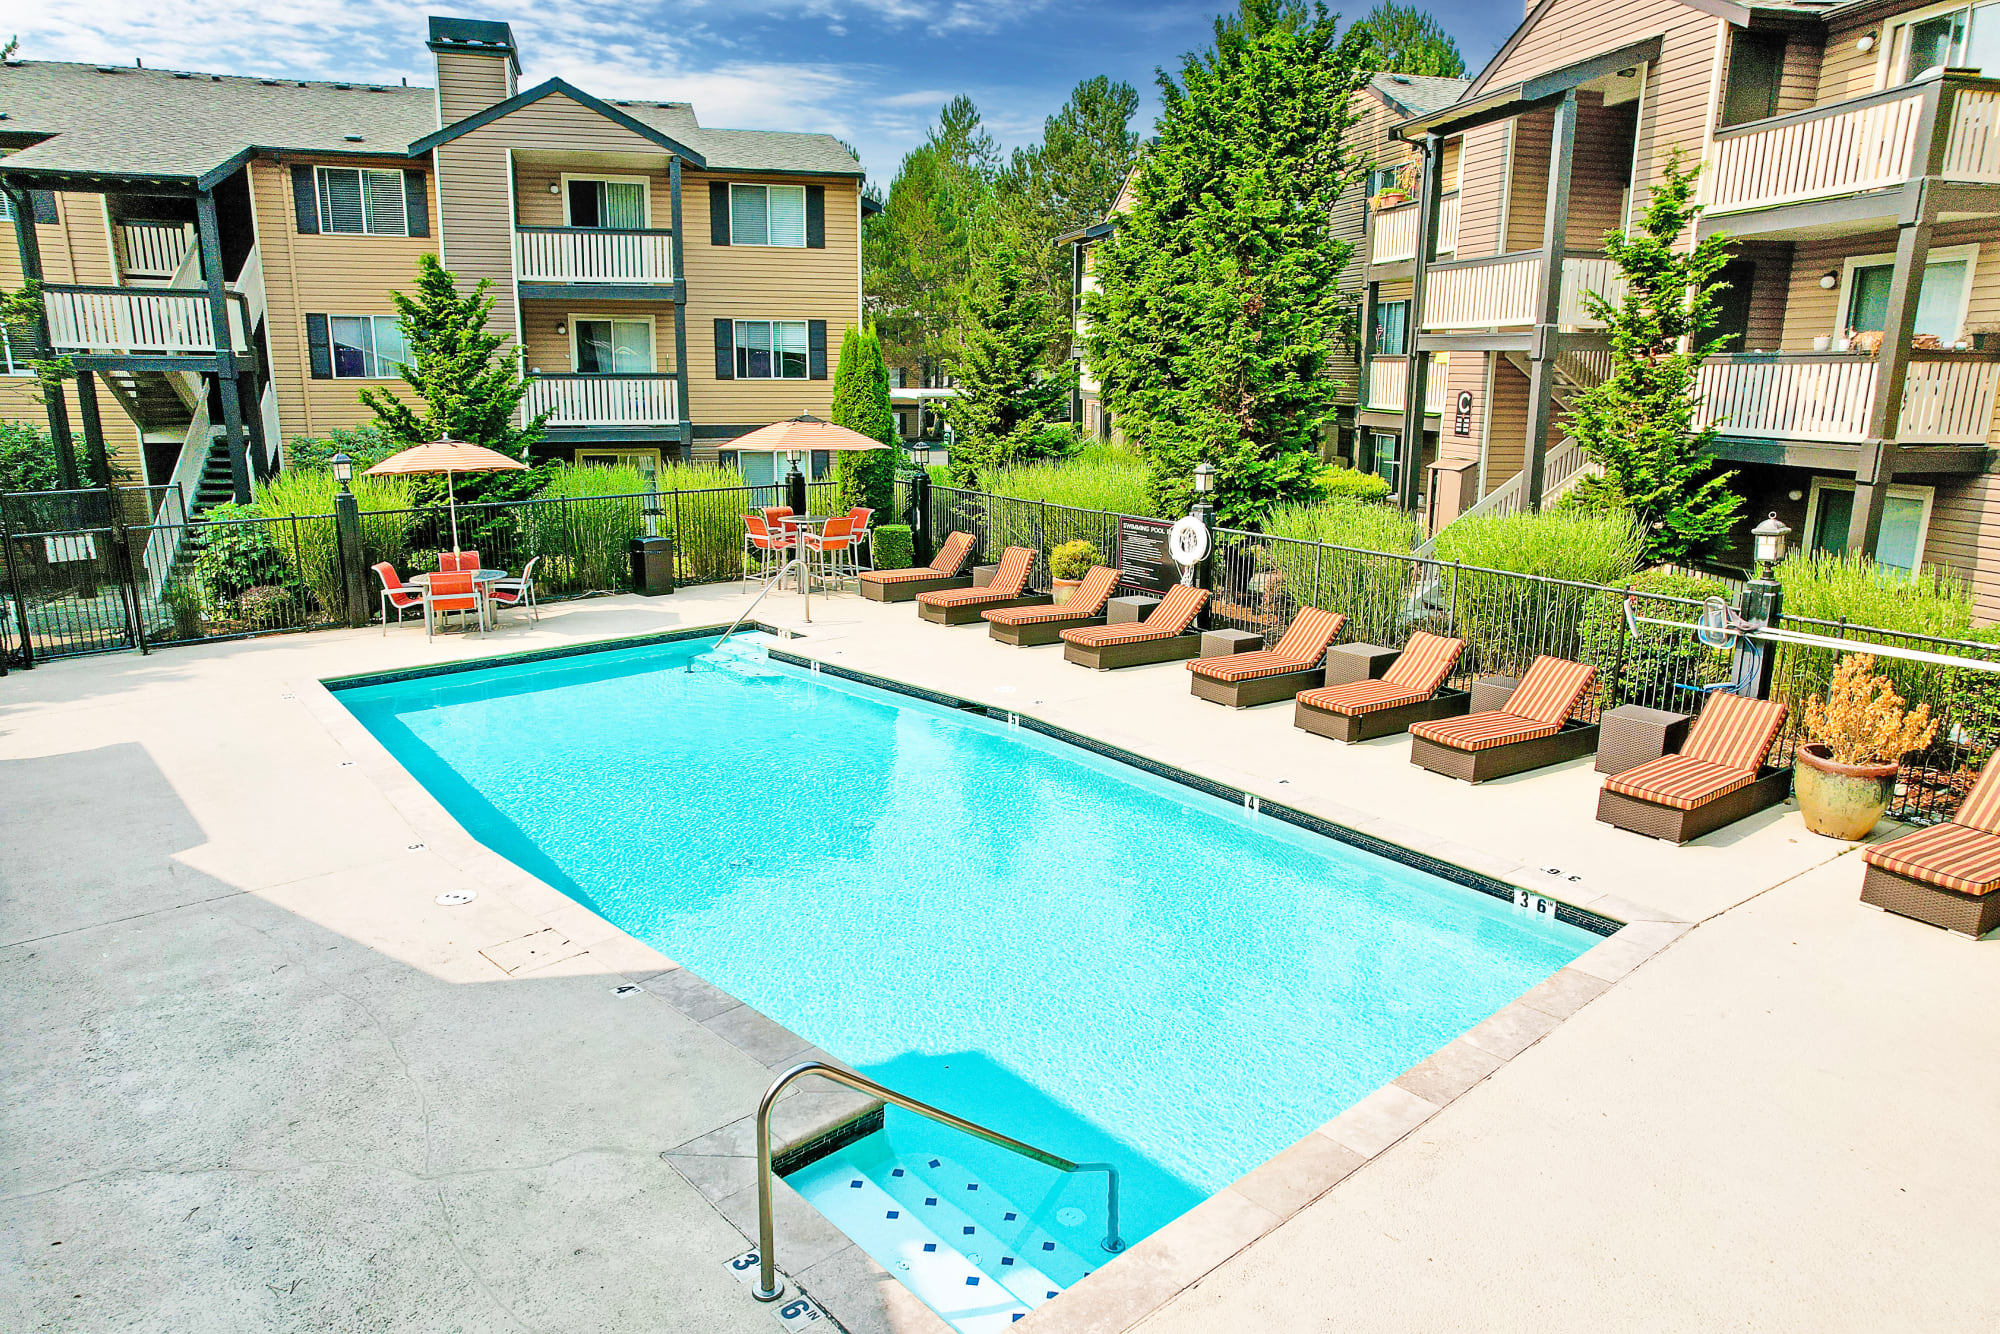 Aerial view of the pool, lounge chairs, leasing office, and landscaping at Newport Crossing Apartments in Newcastle, Washington